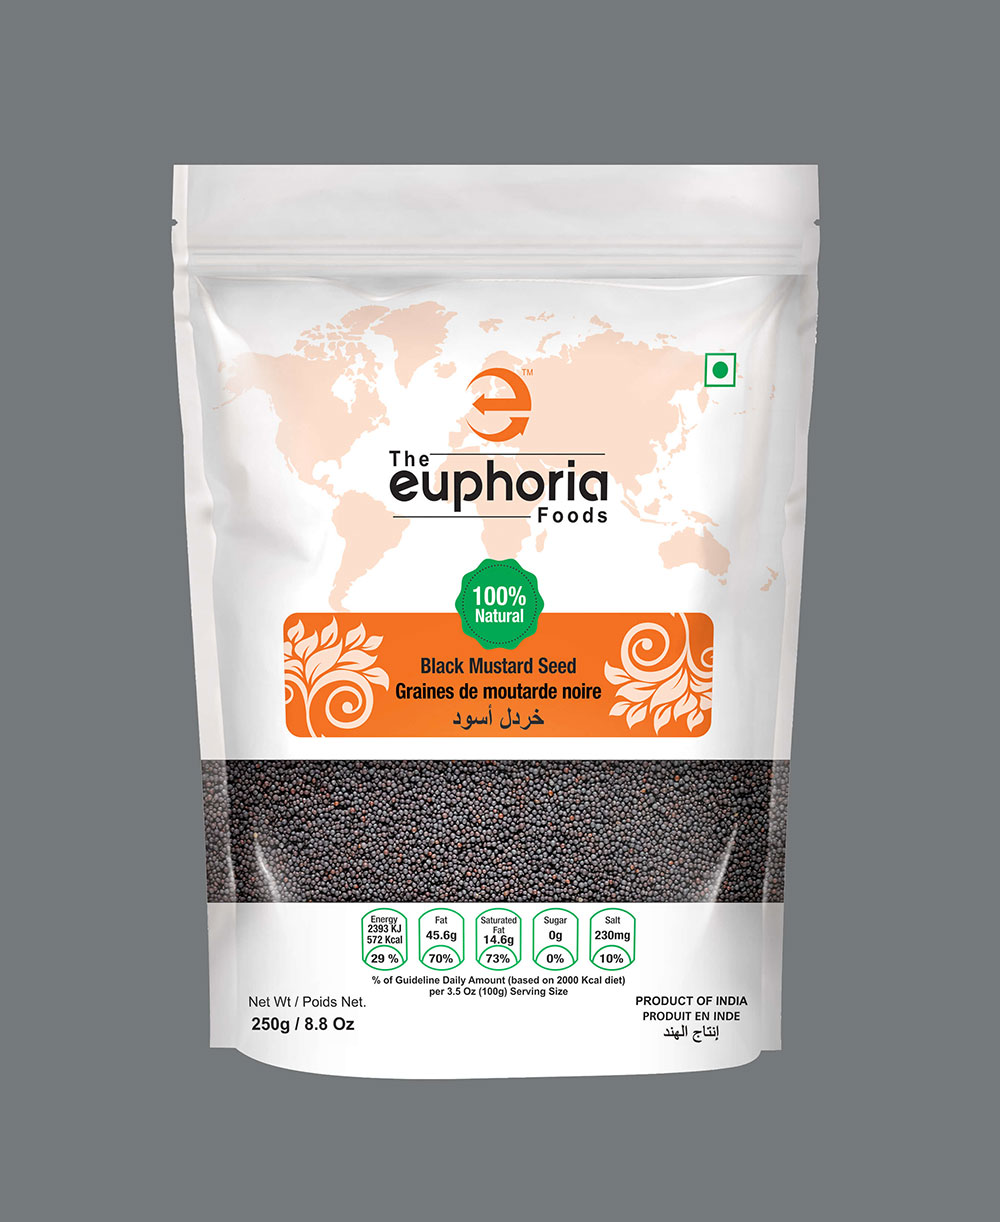 BLACK MUSTARD SEED at Euphoria Impex, Exporting Indian Spices